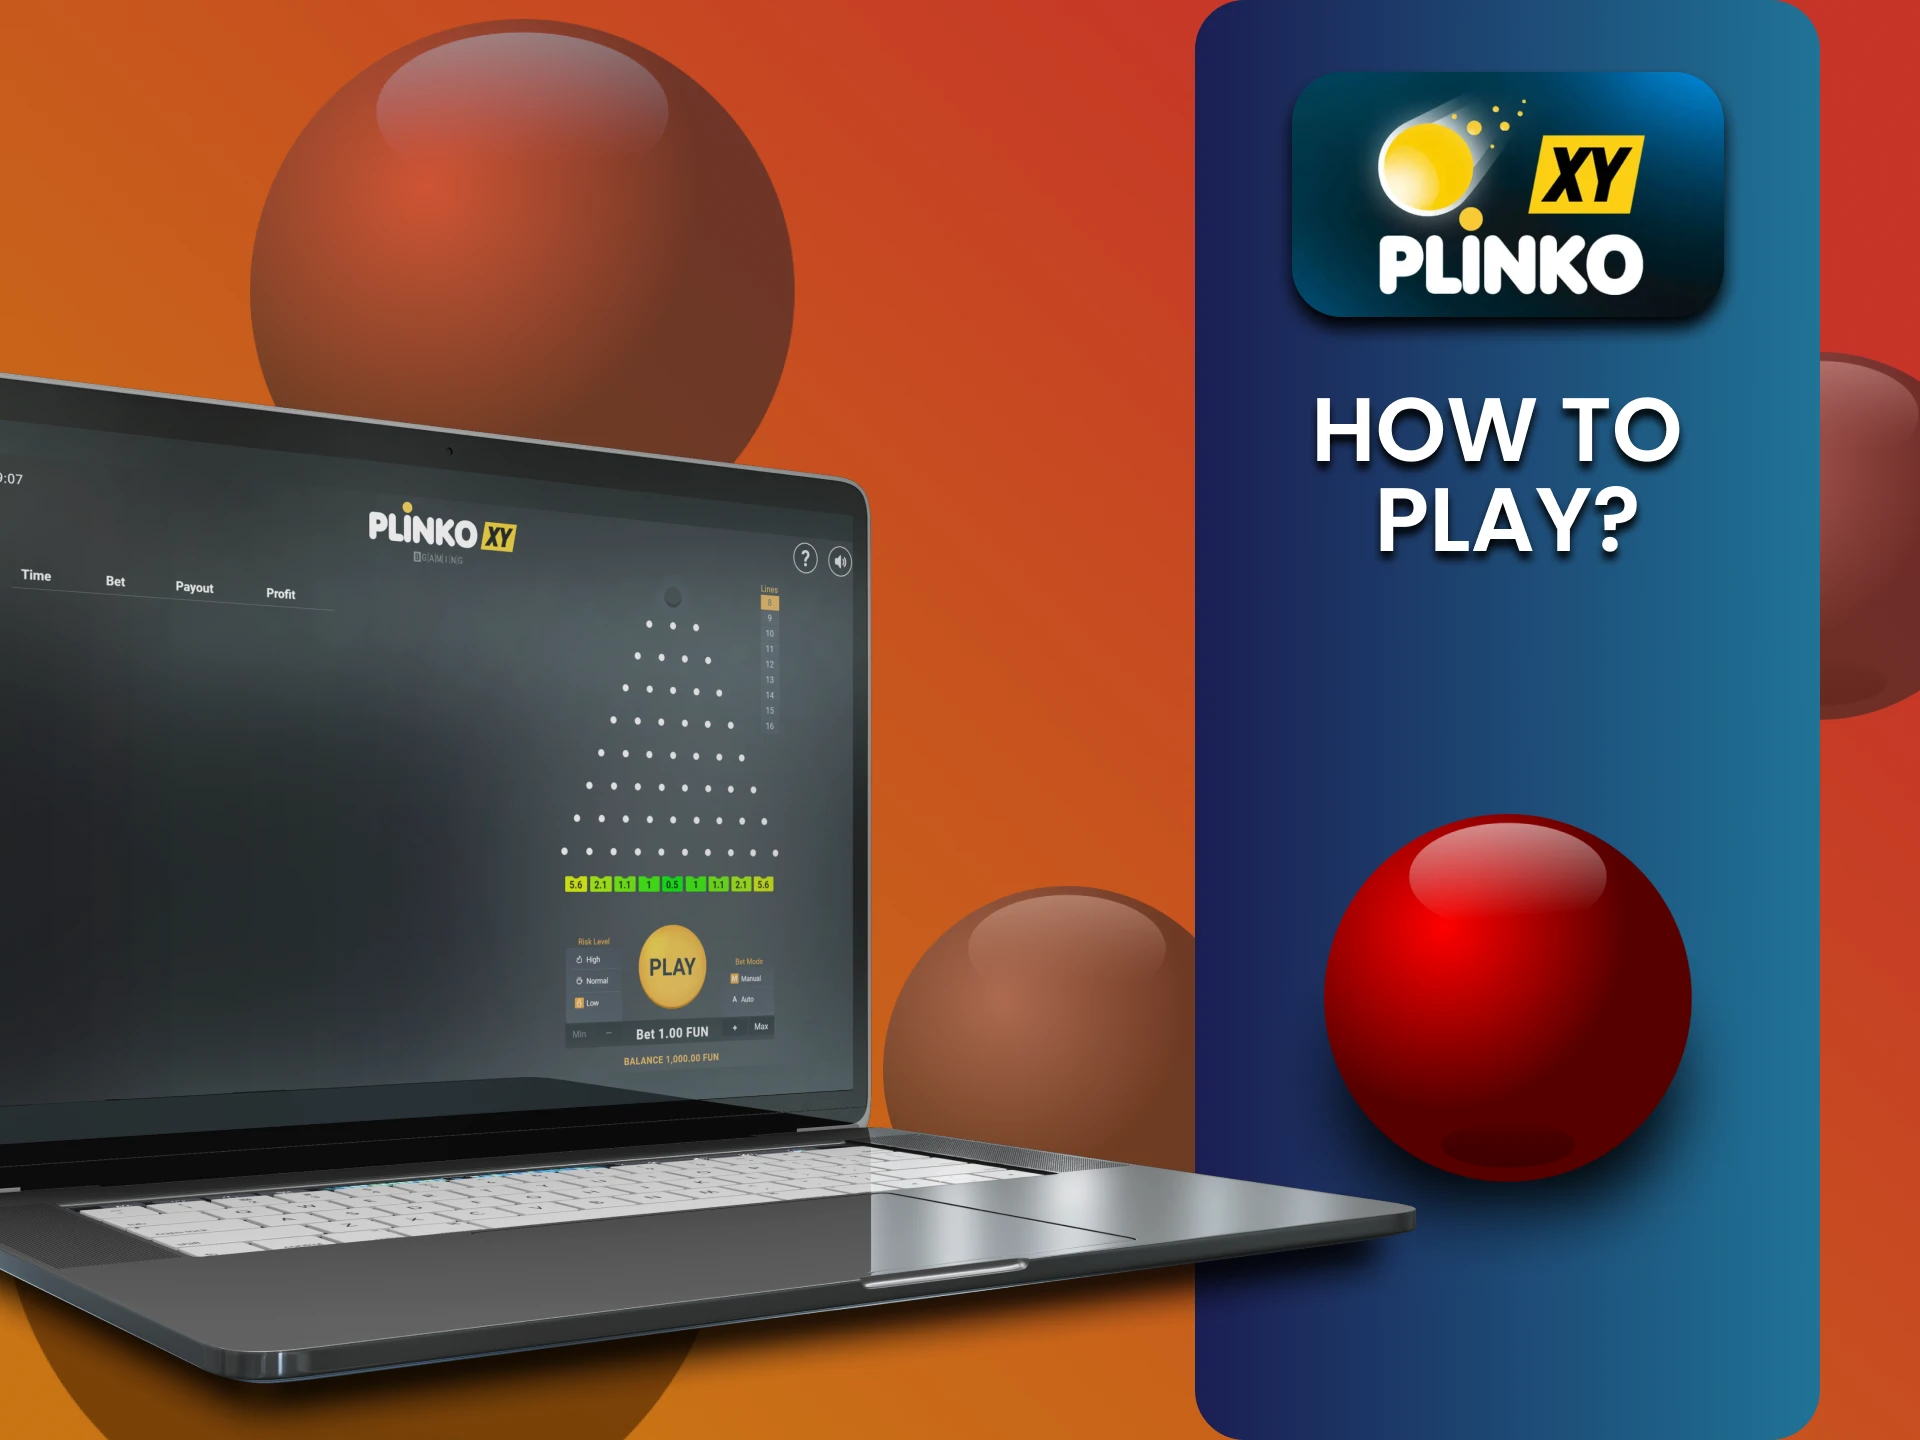 Find out how to start playing Plinko XY.